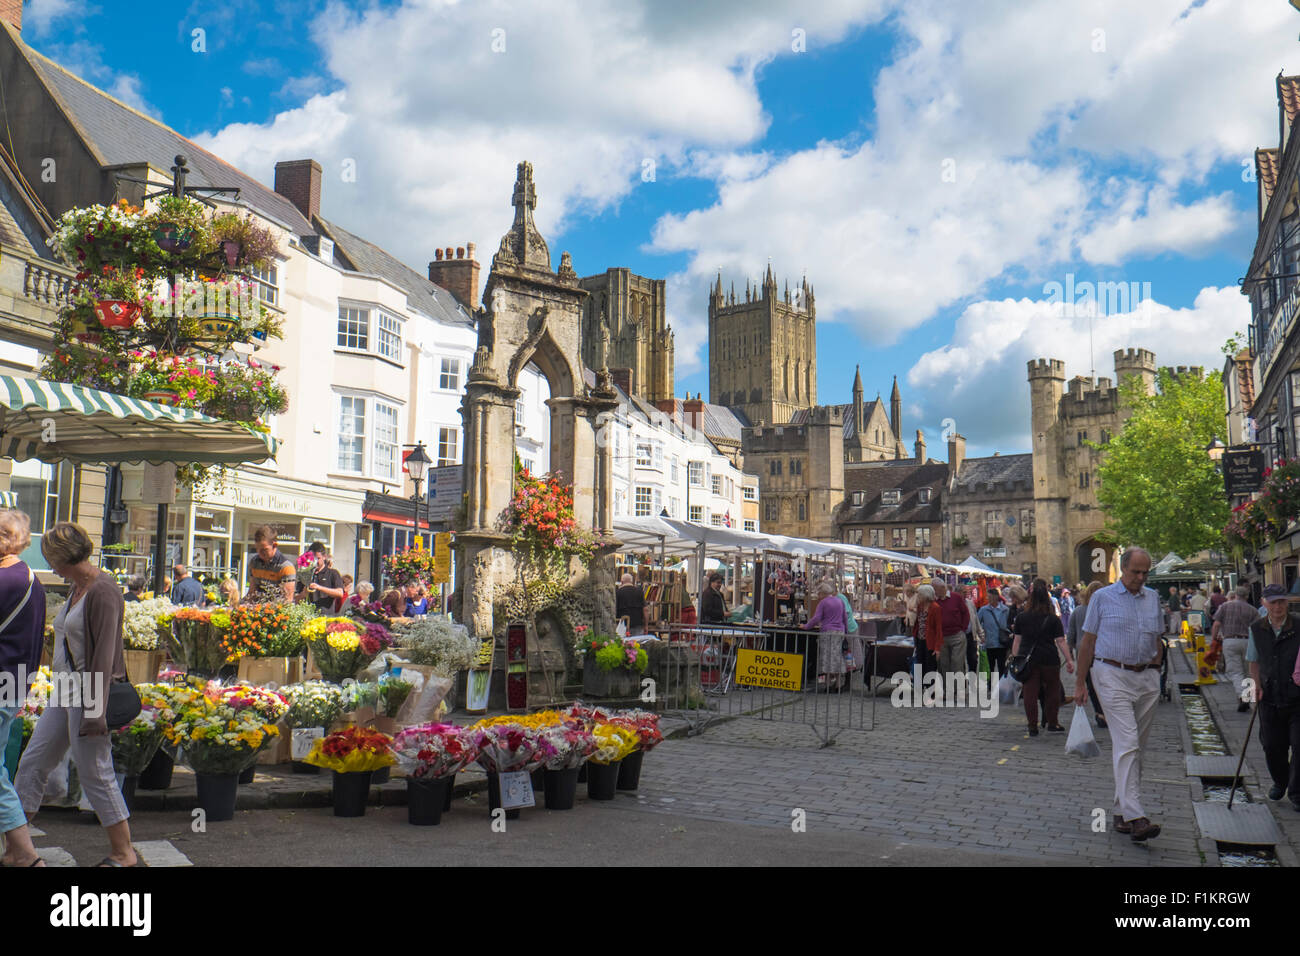 Wells a small cathedral City in Somerset England UK  Market day is Wednesday. Stock Photo